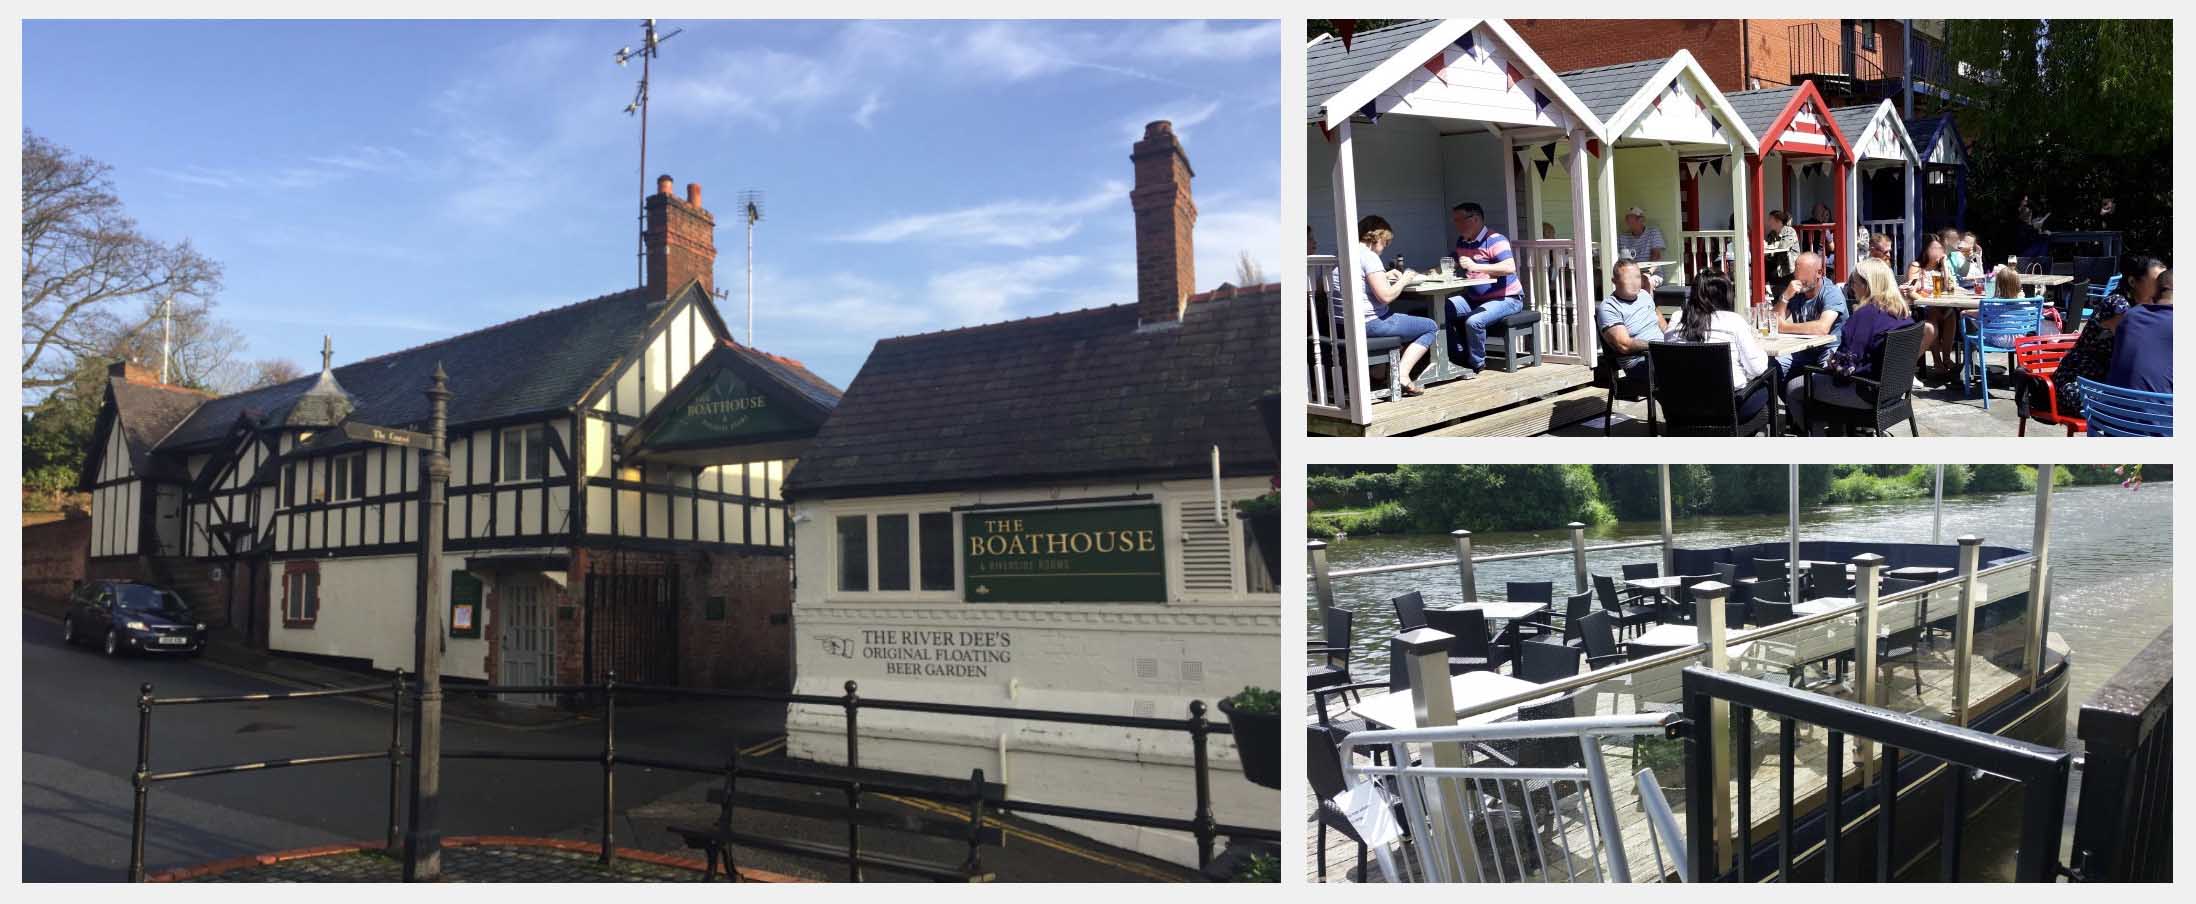 Best Beer Gardens in Chester - The Boathouse